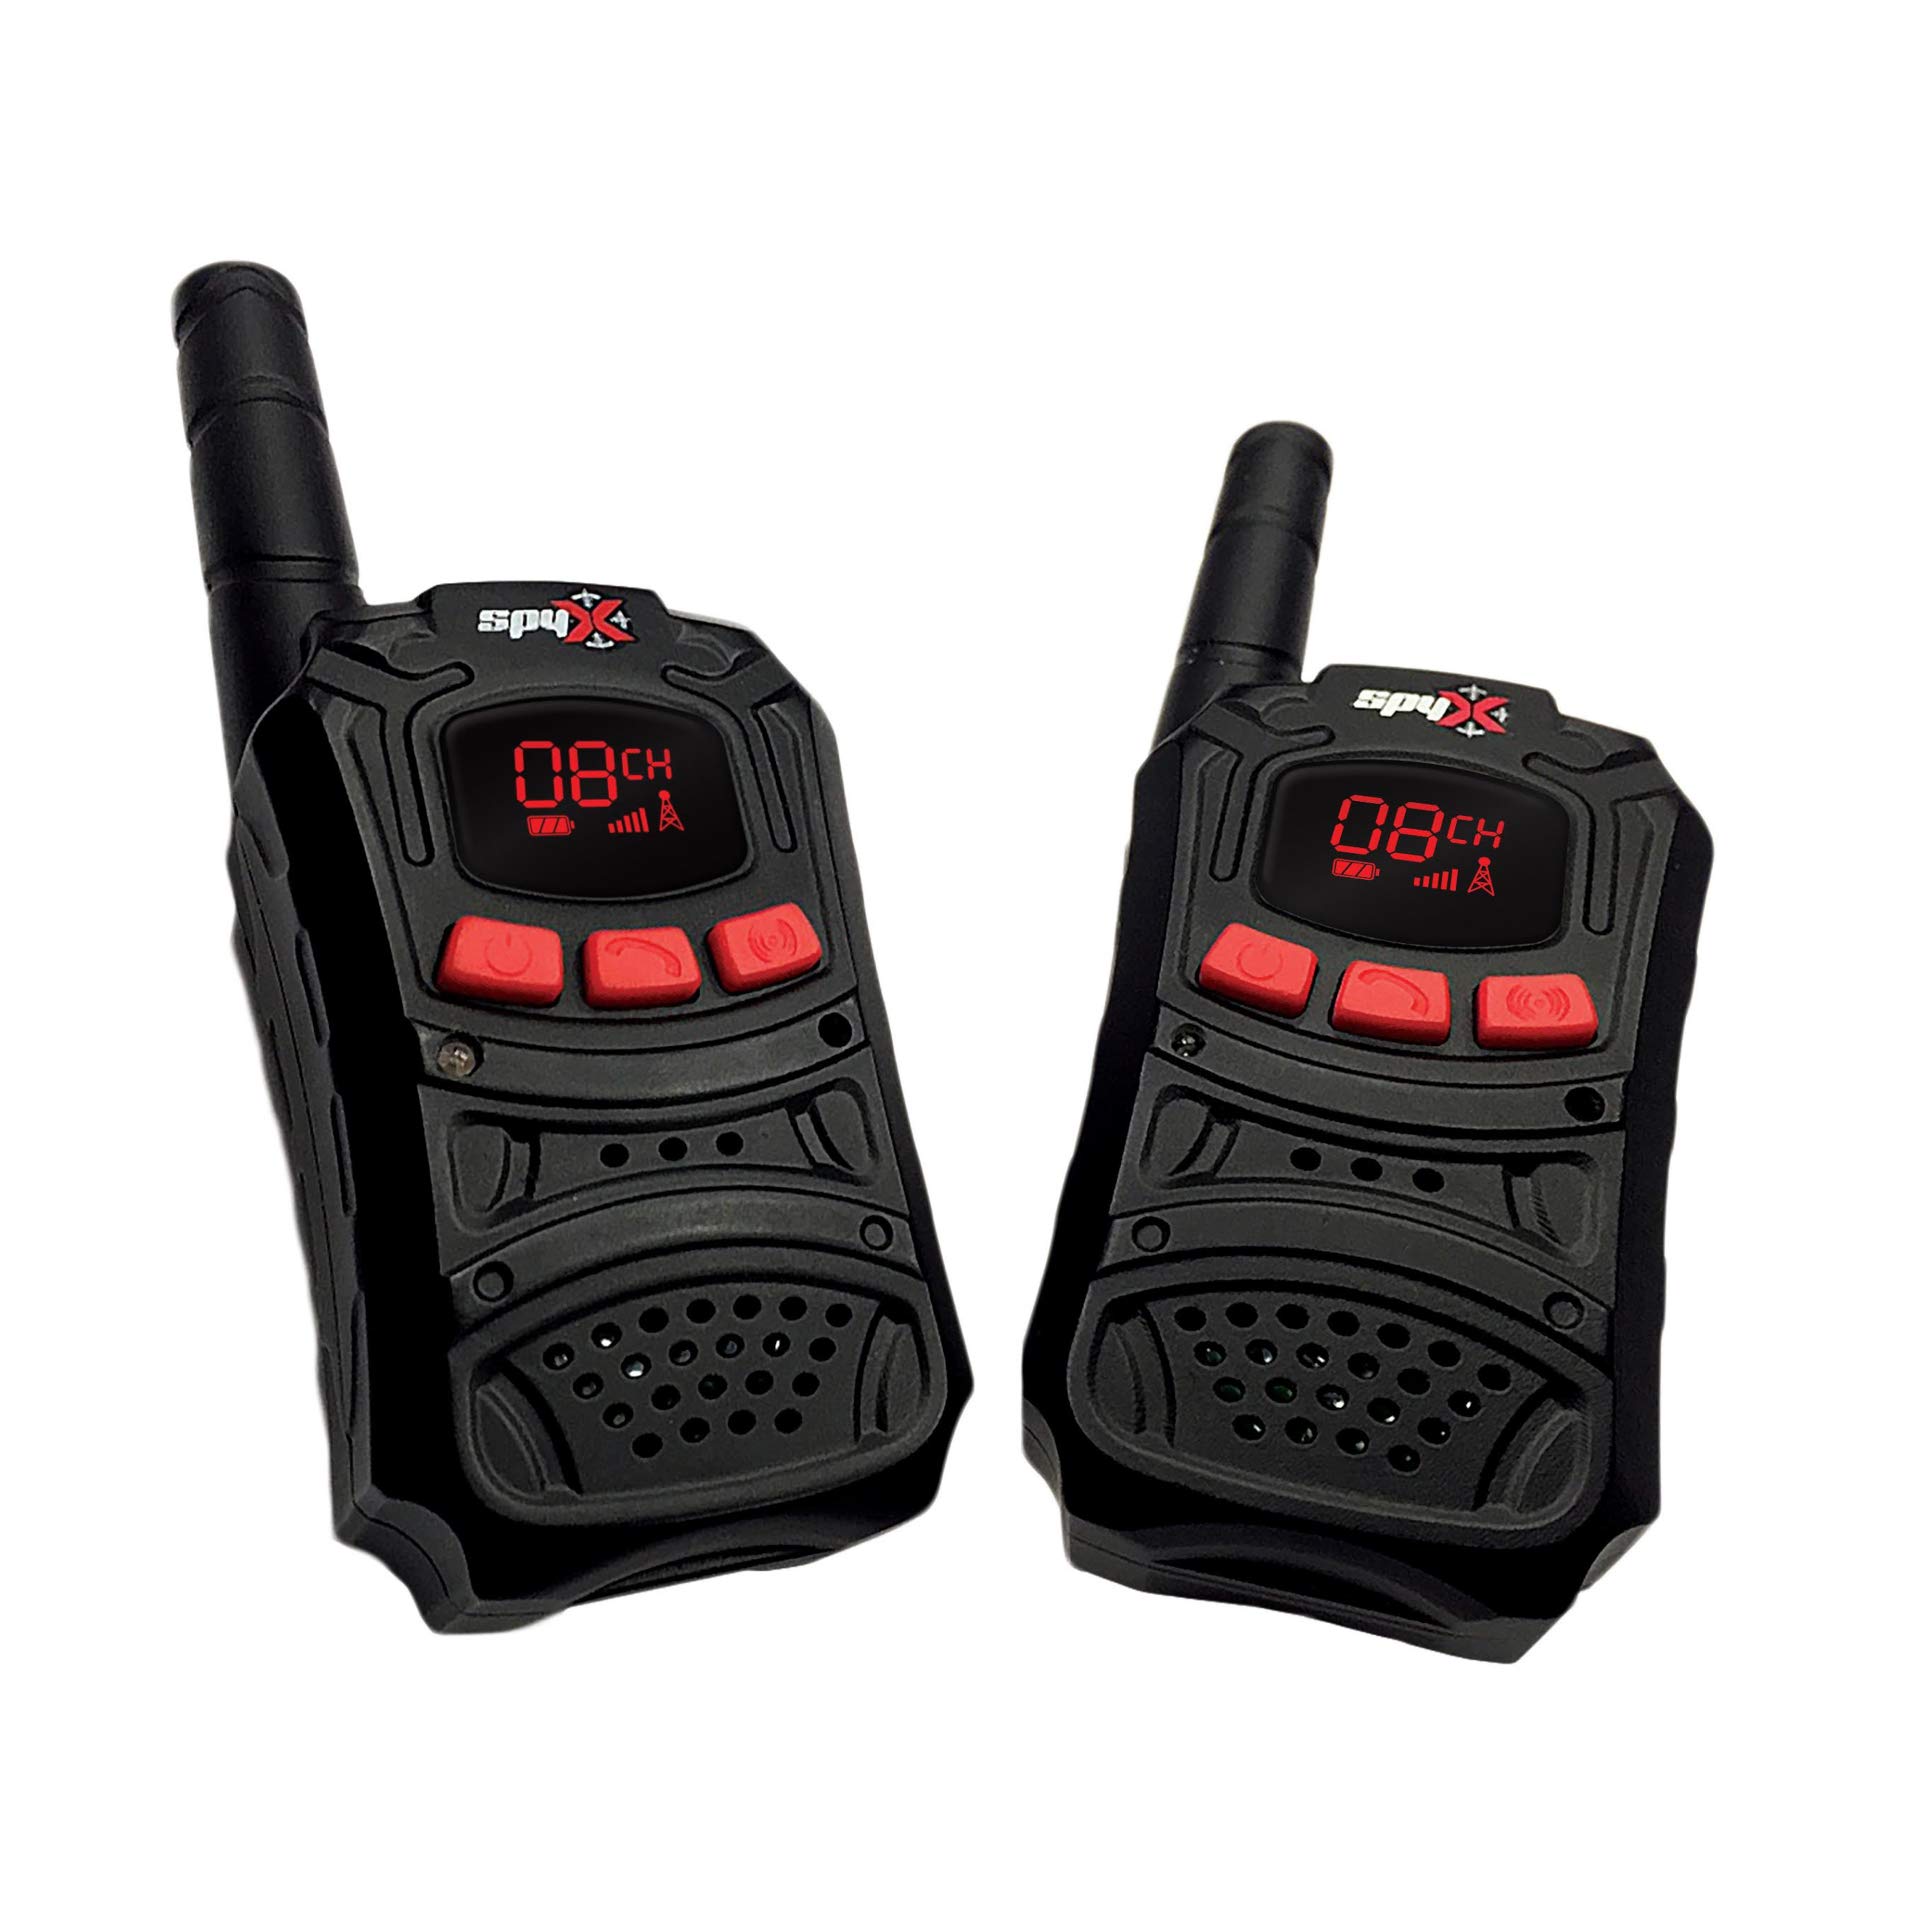 MUKIKIM SpyX/Micro Gear Set + Walkie Talkies - 4 Must-Have Spy Tools Attached to an Adjustable Belt + 2 Player Buddy Play Walkie Talkies! Jr Spy Fan Favorite & Perfect for Your Spy Gear Collection!